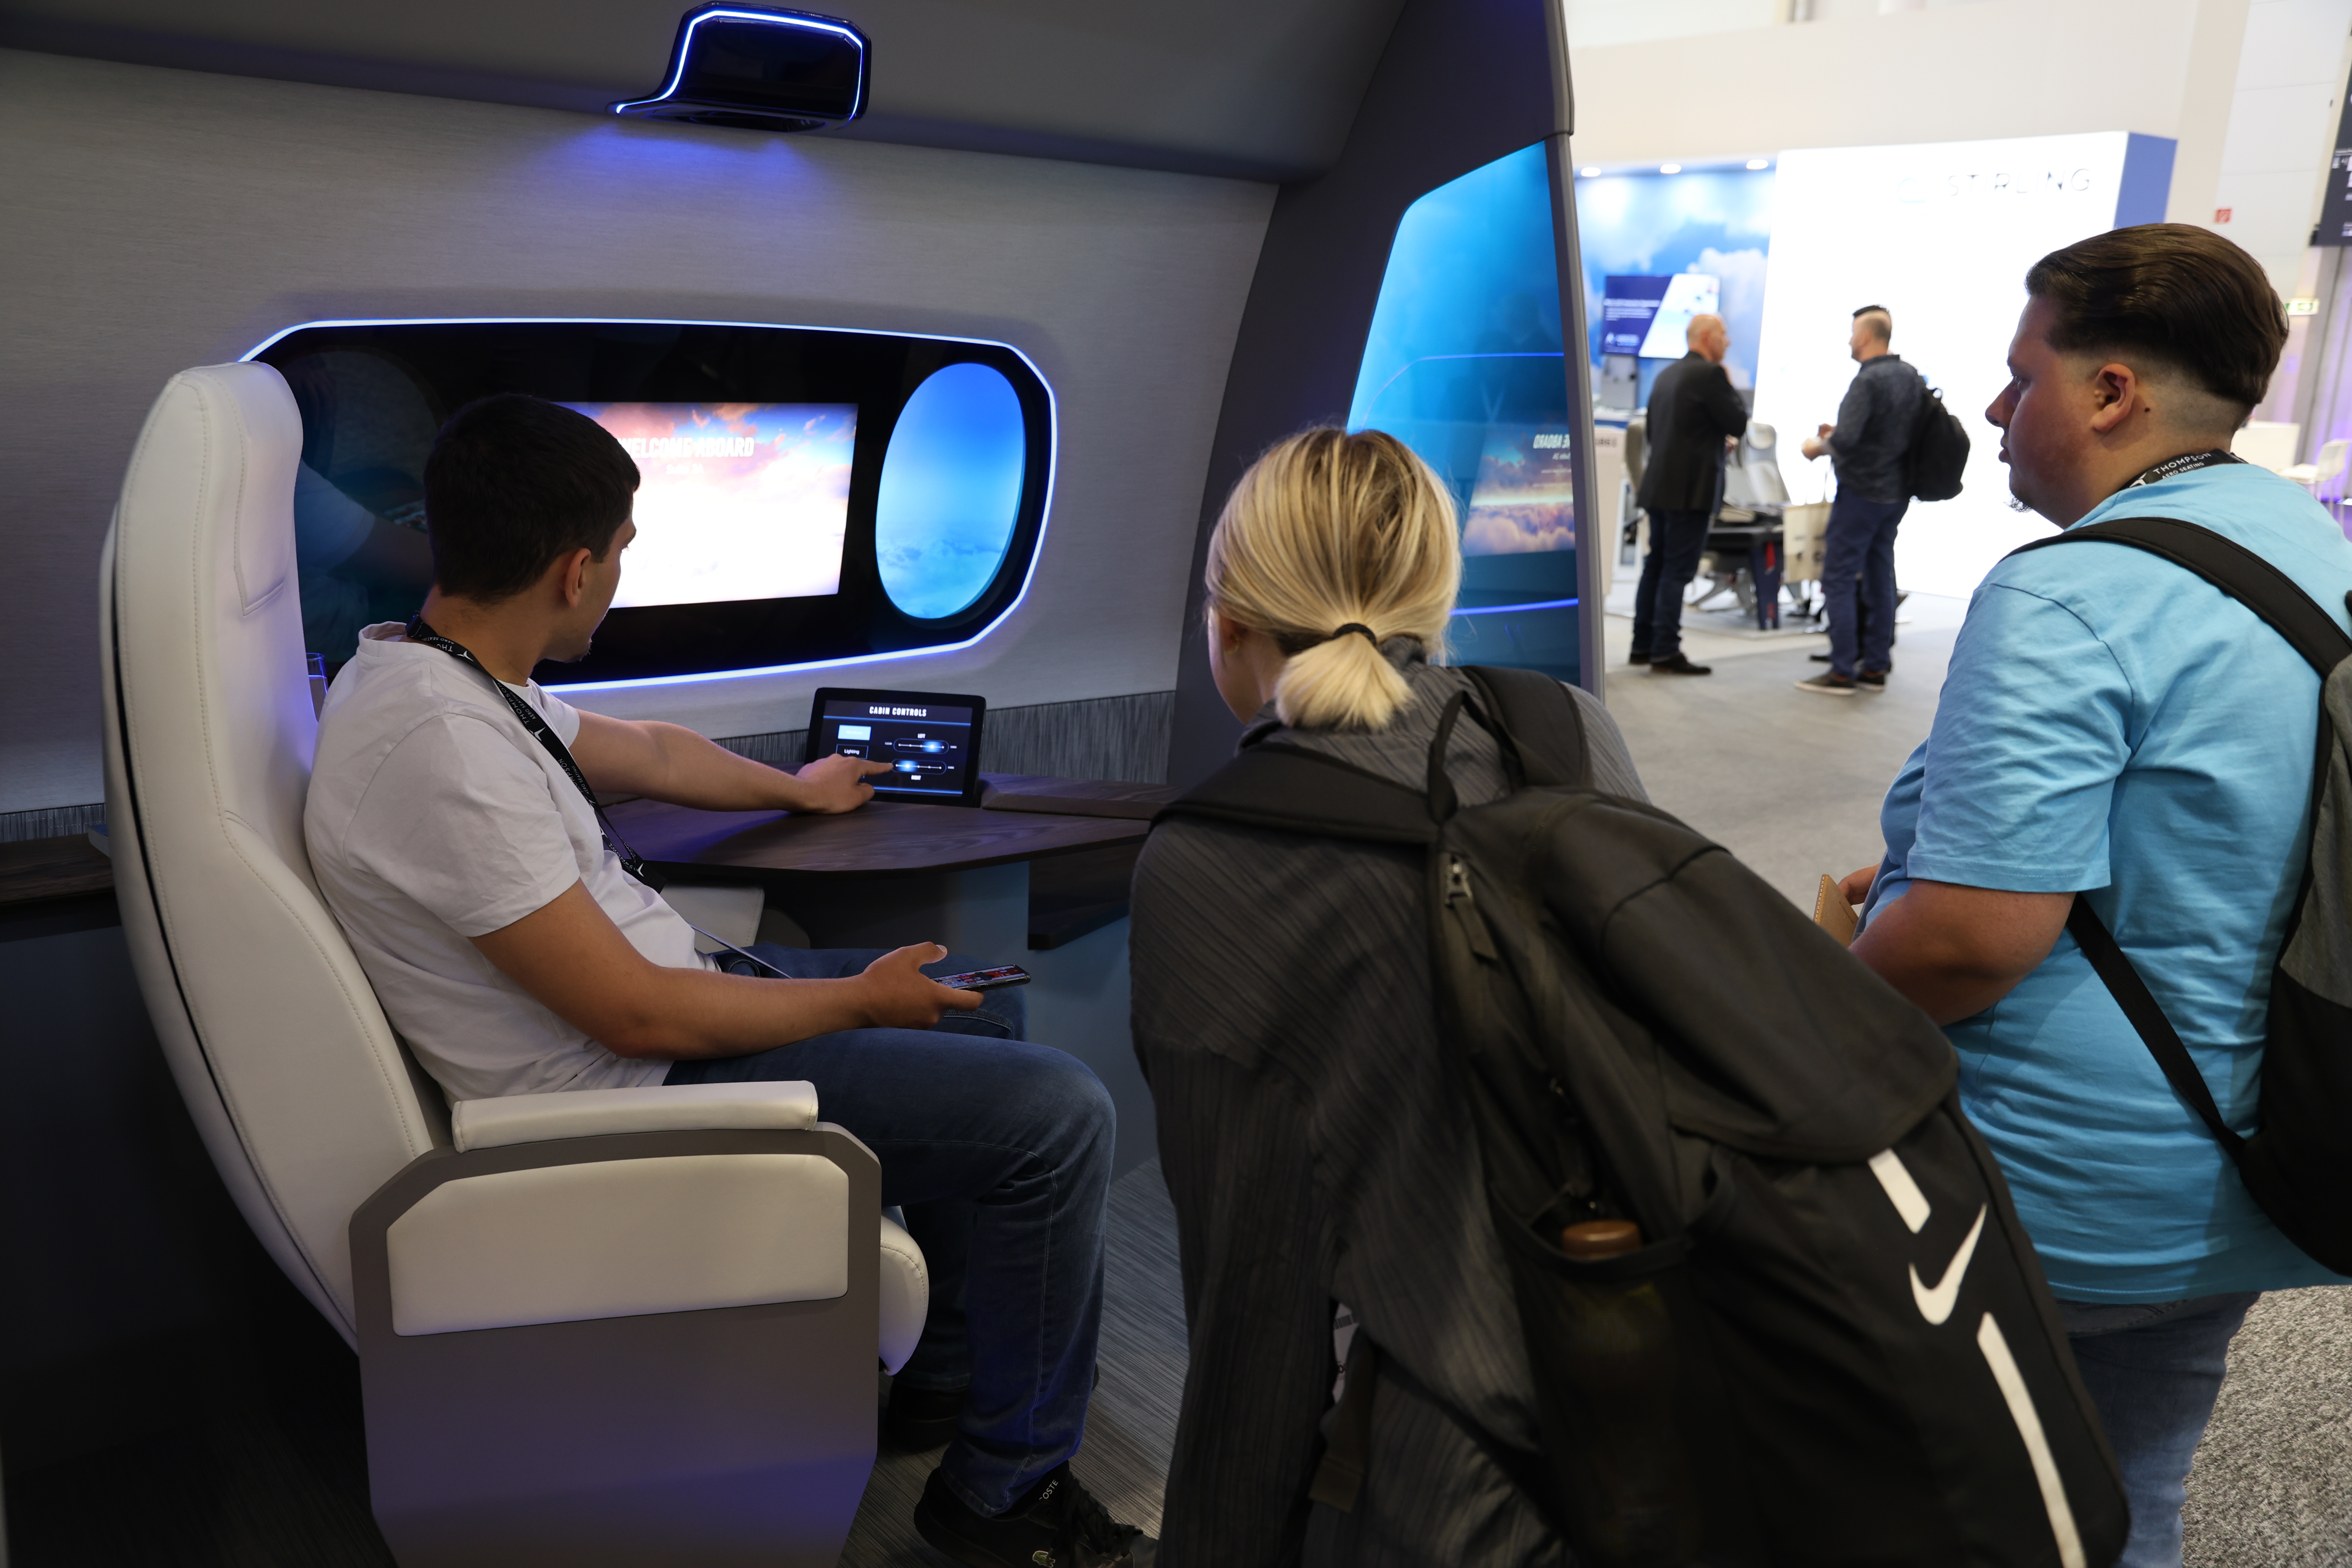 three people demonstrating inflight entertainment and connectivity hardware in a cabin mock-up